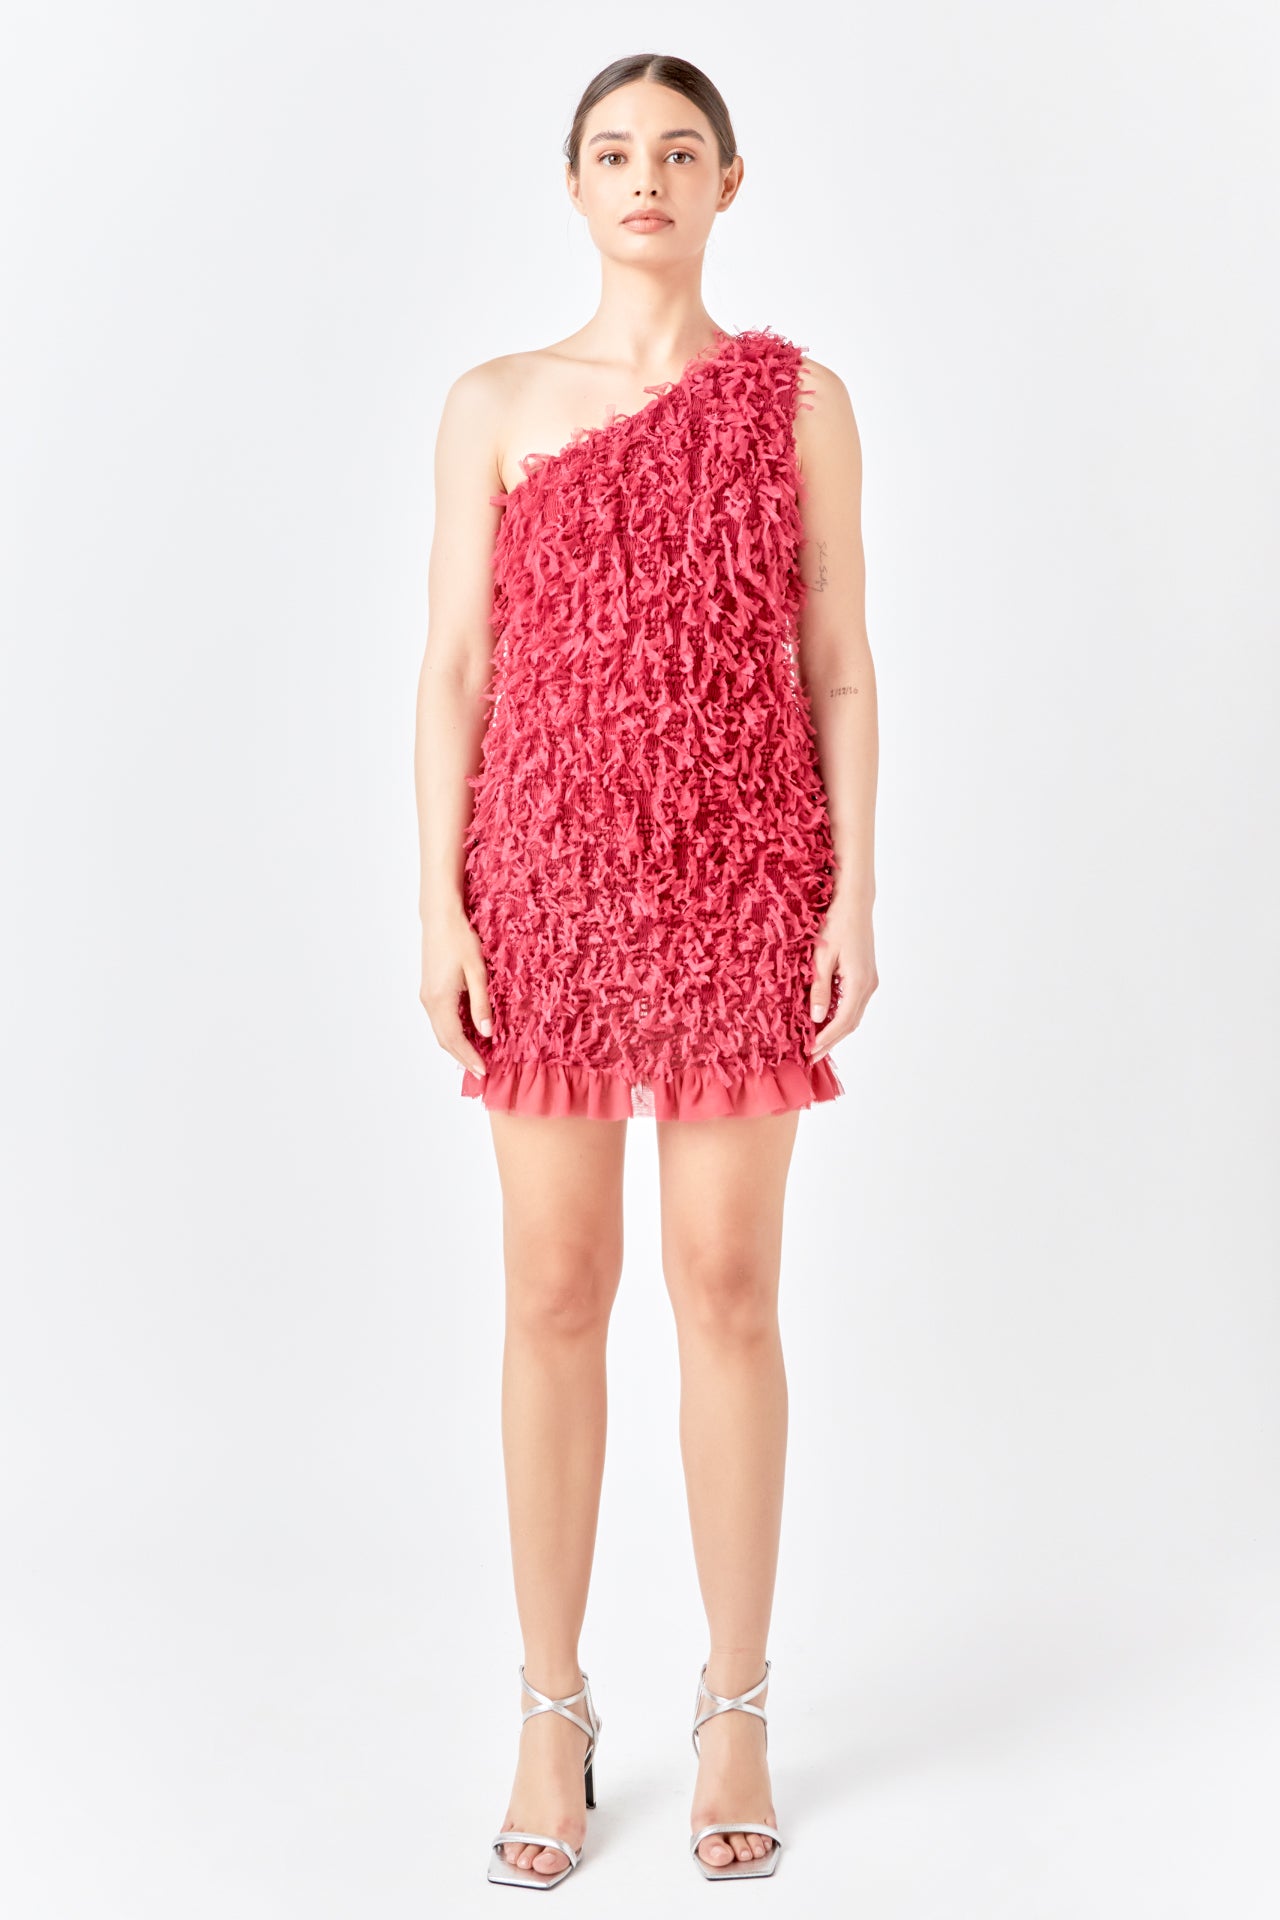 ENDLESS ROSE - Mesh Trimmed One Shoulder Mini Dress - DRESSES available at Objectrare